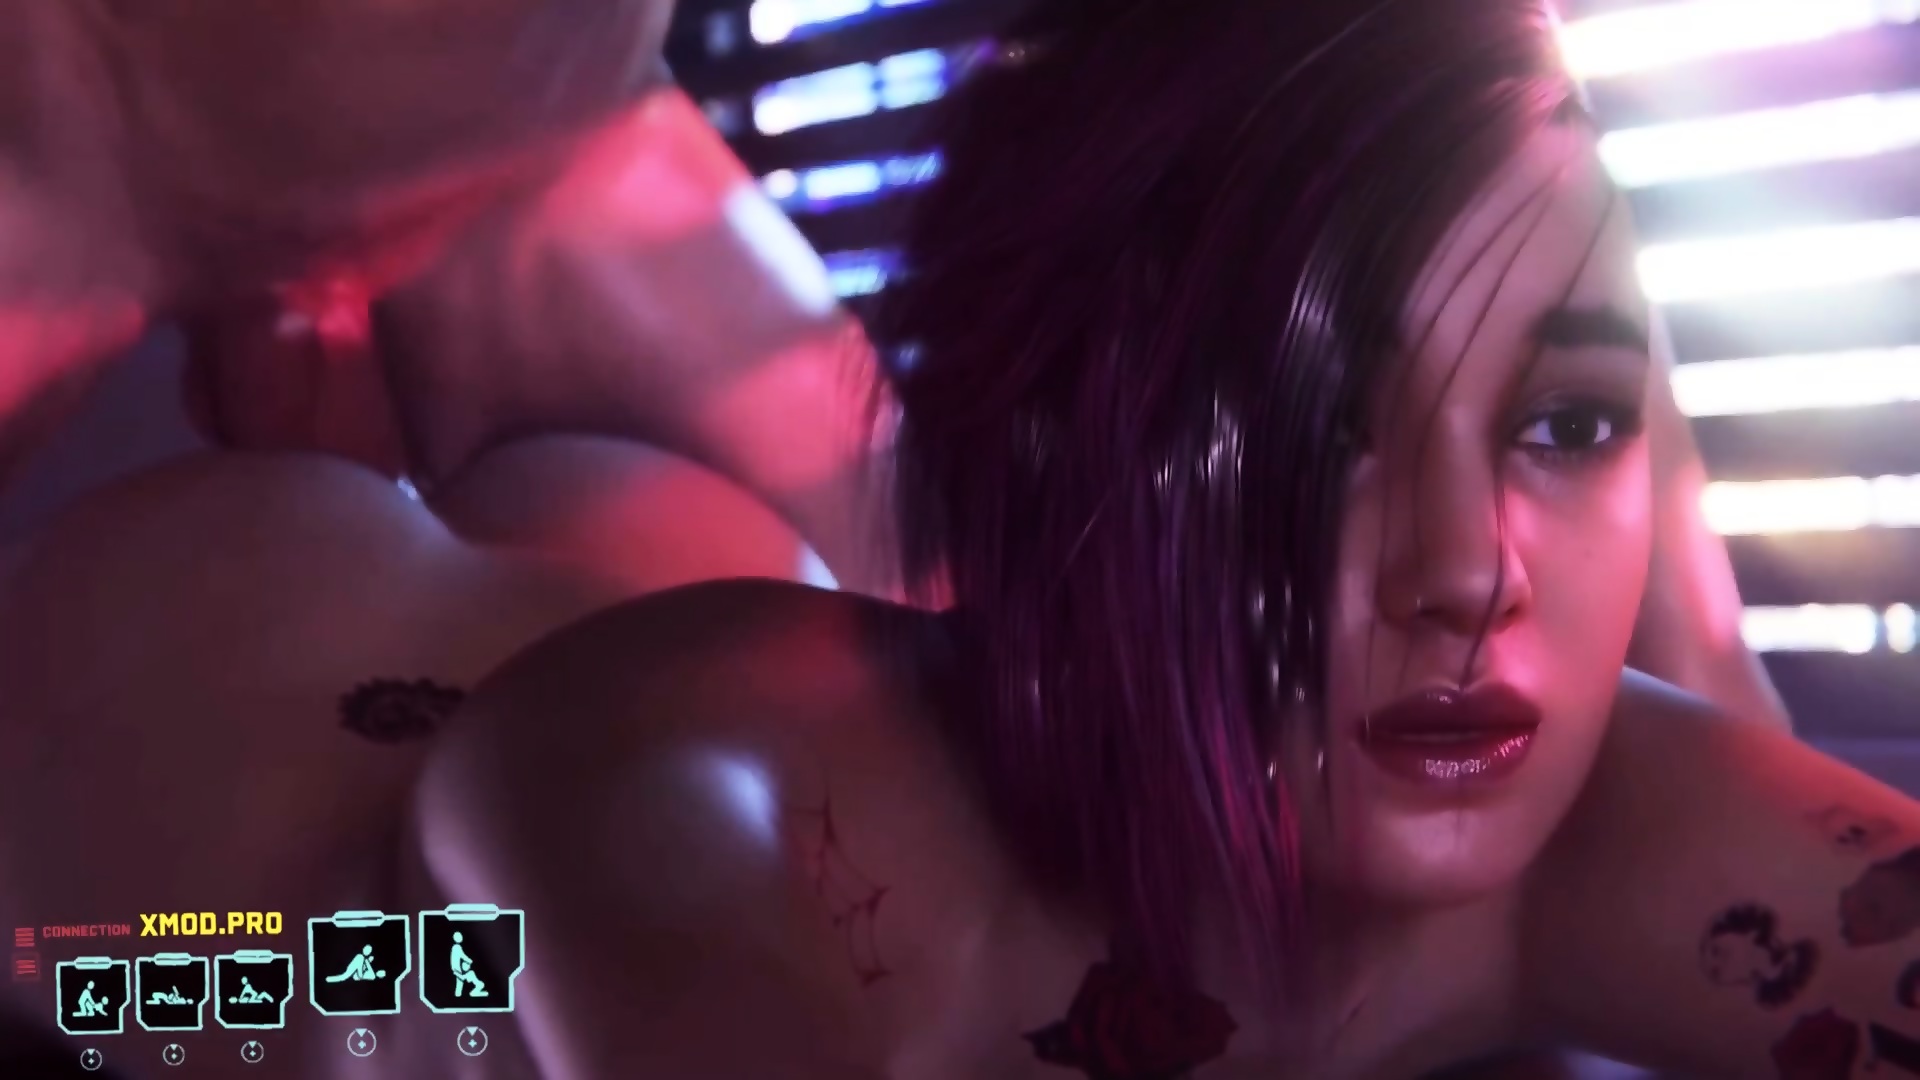 Hot Cyberpunk Porn - Animation Anal Sex When A Judy Alvarez Lies On Her Stomach And A Guy Fucks Her image pic pic